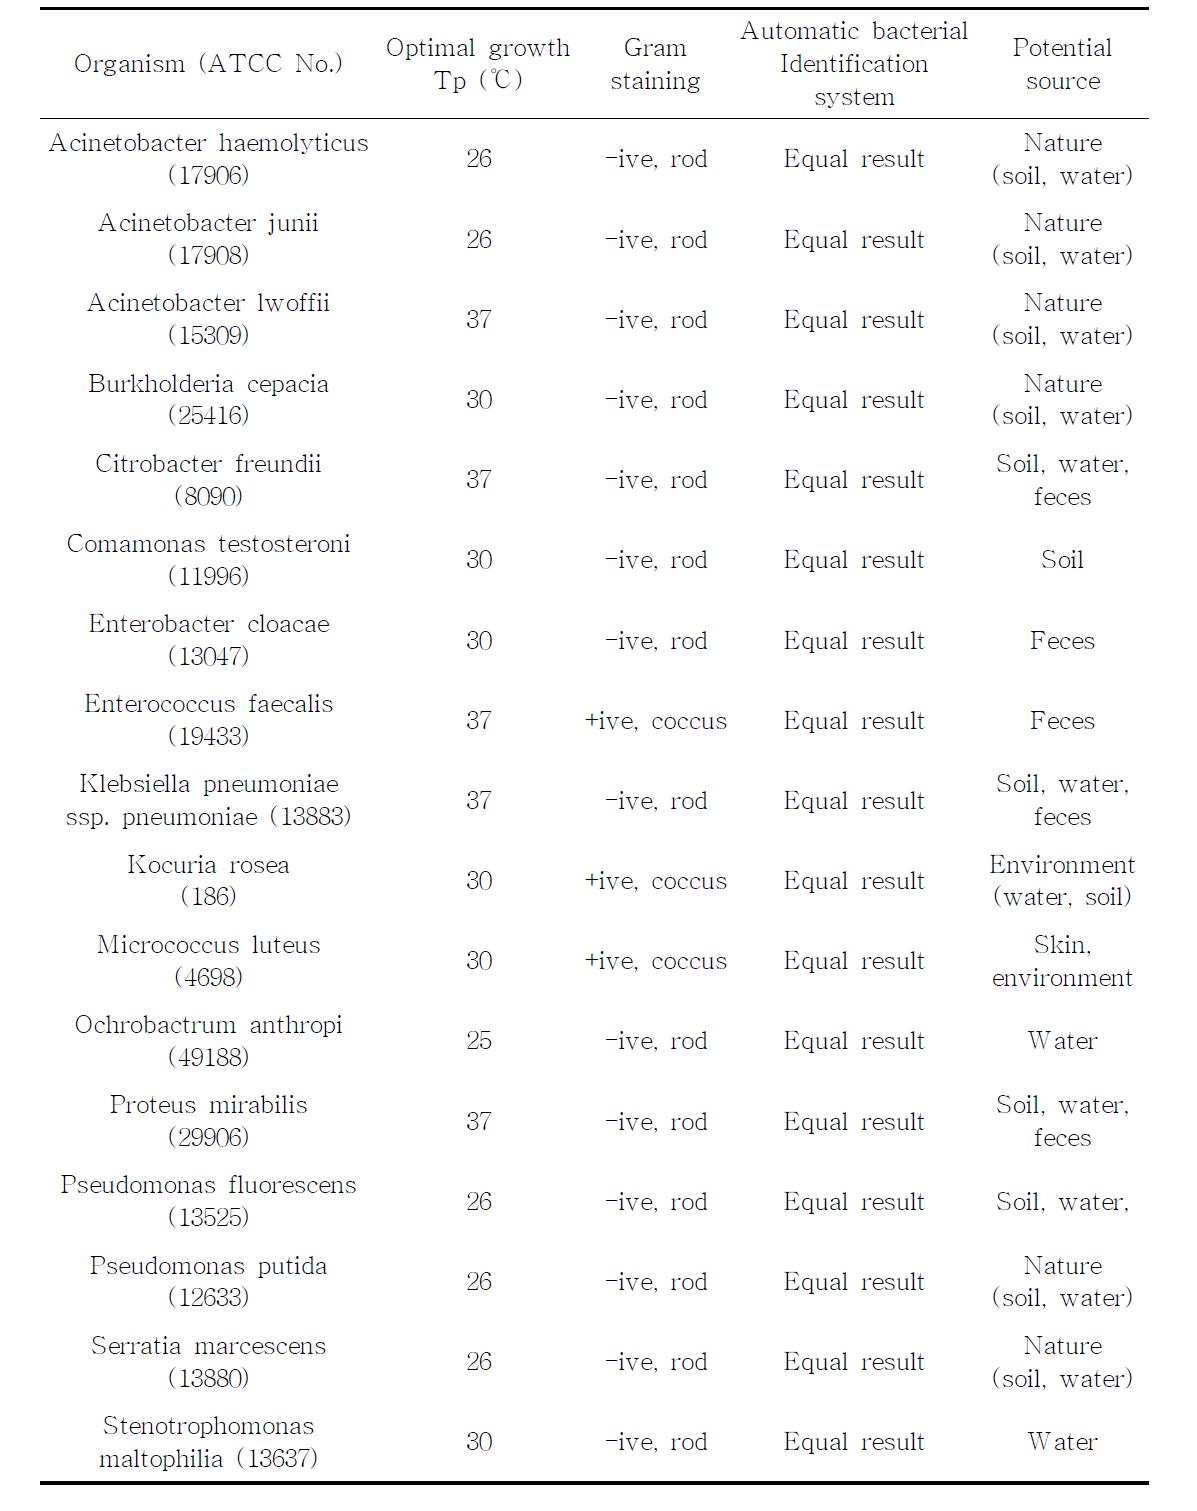 List of reference bacteria used in this study and their potential source